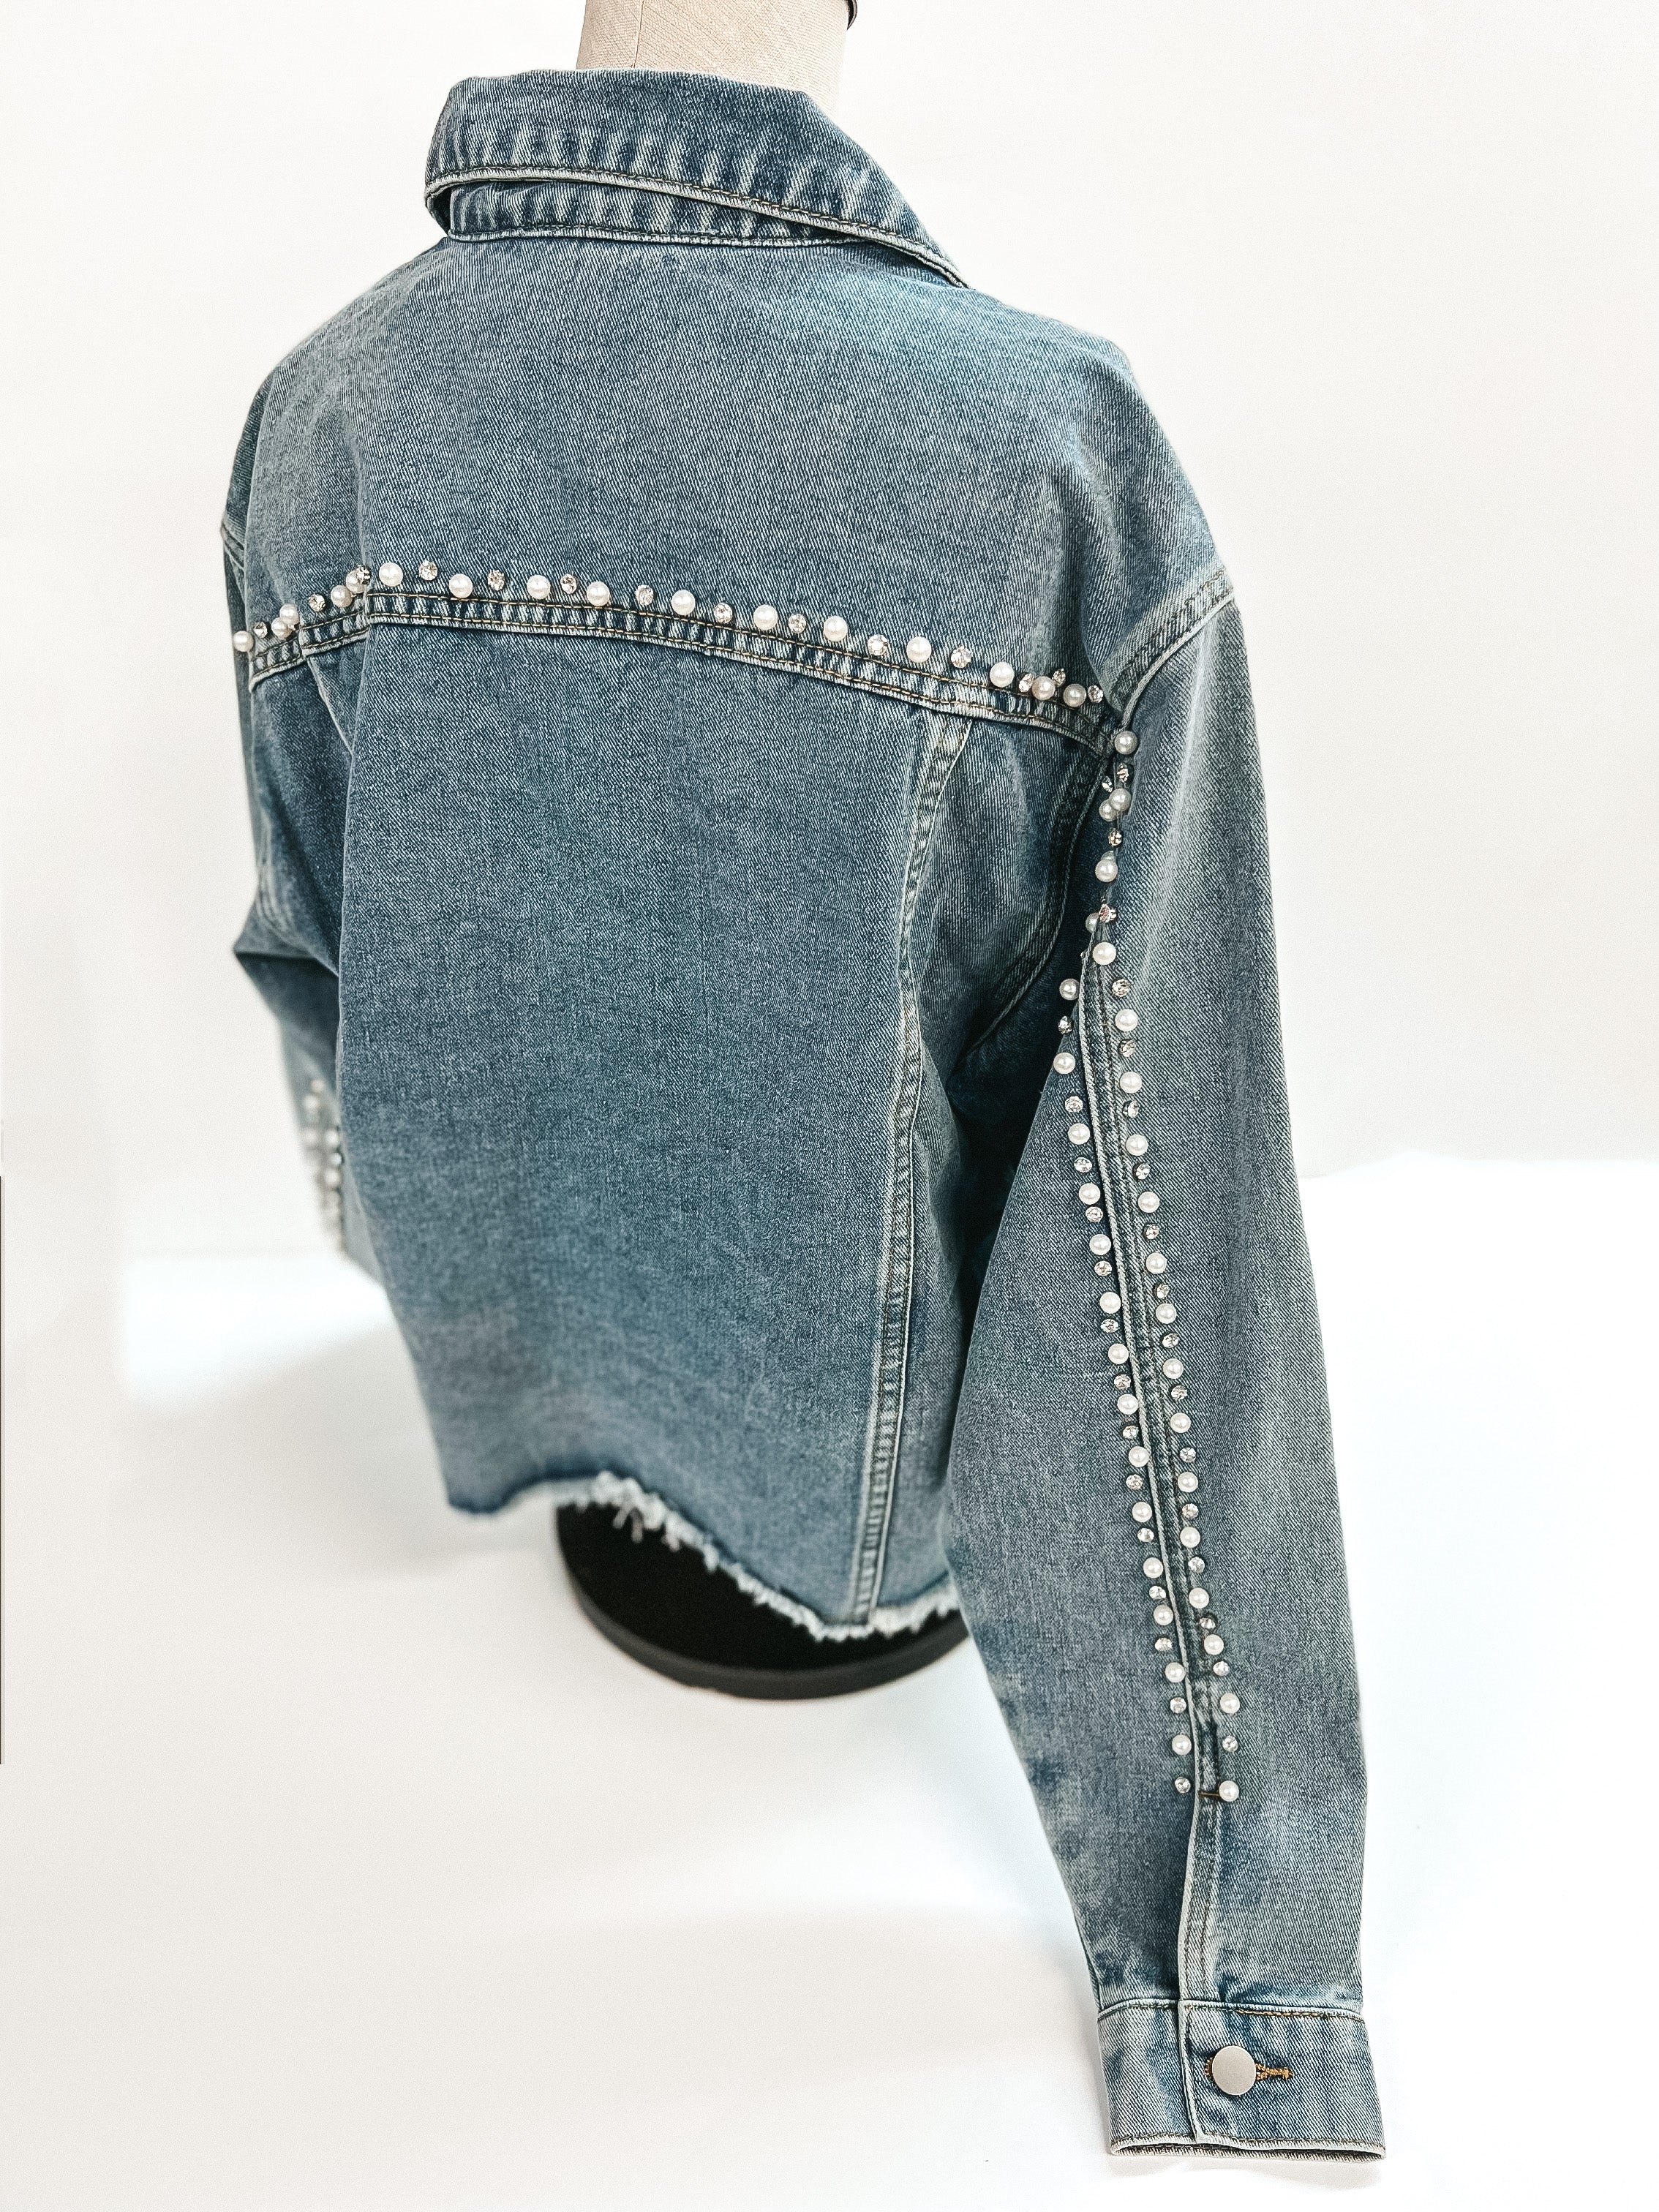 Better Than You Imagined Pearl and Crystal Beaded Denim Jacket in Medium Wash - Giddy Up Glamour Boutique